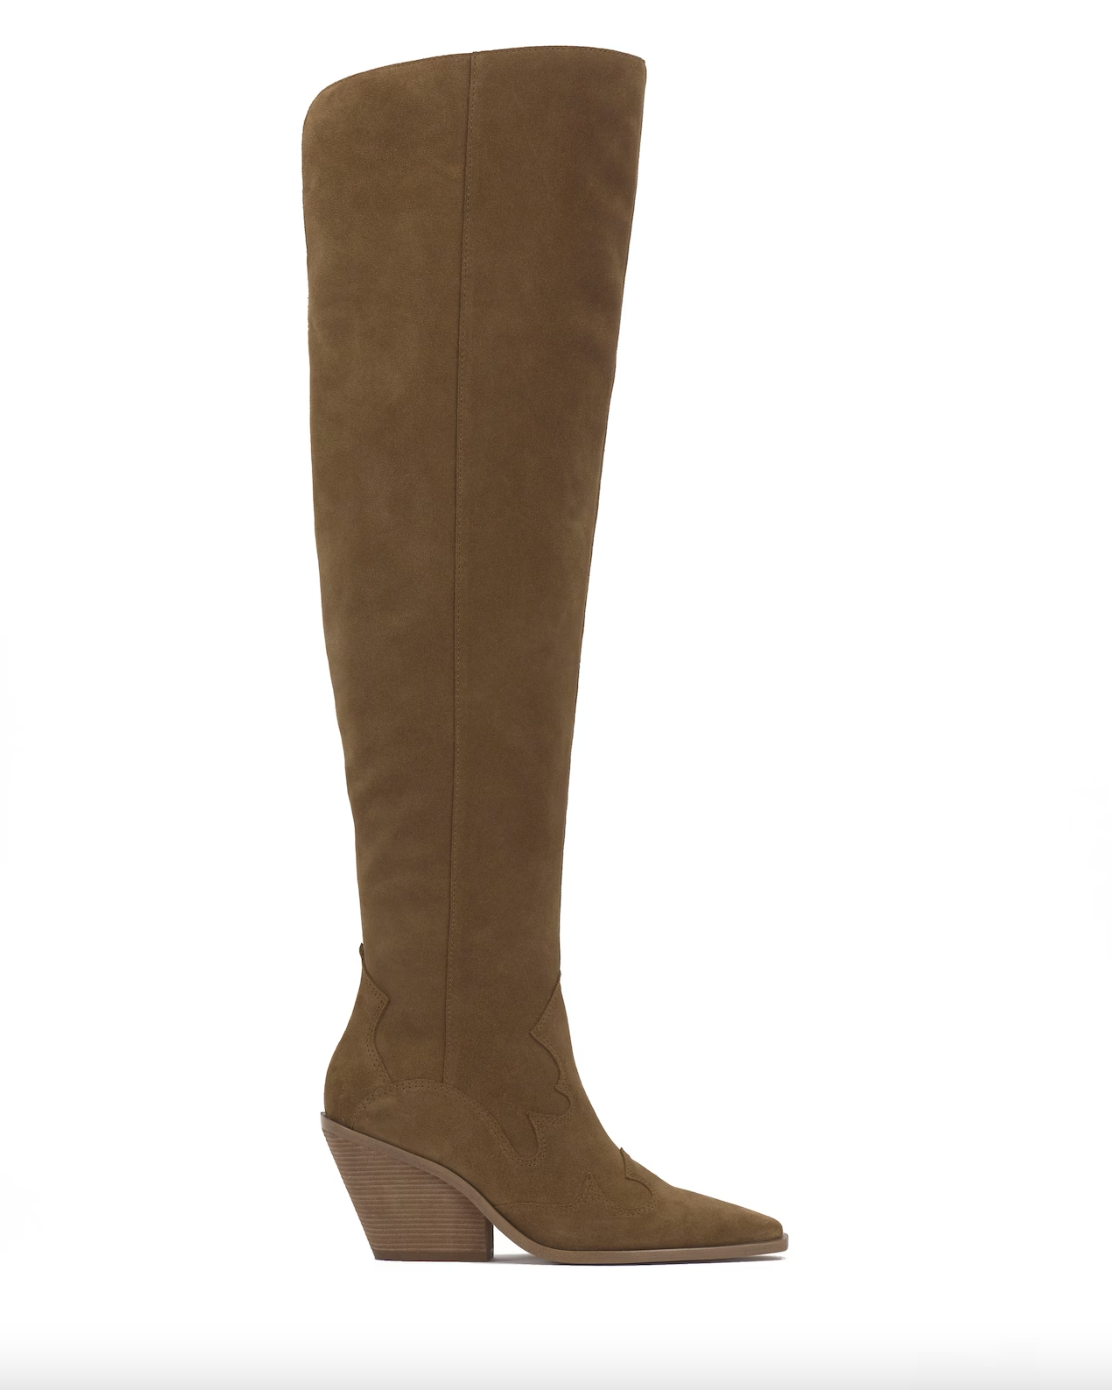 Vince Camuto + Shaharla Over-The-Knee Boot